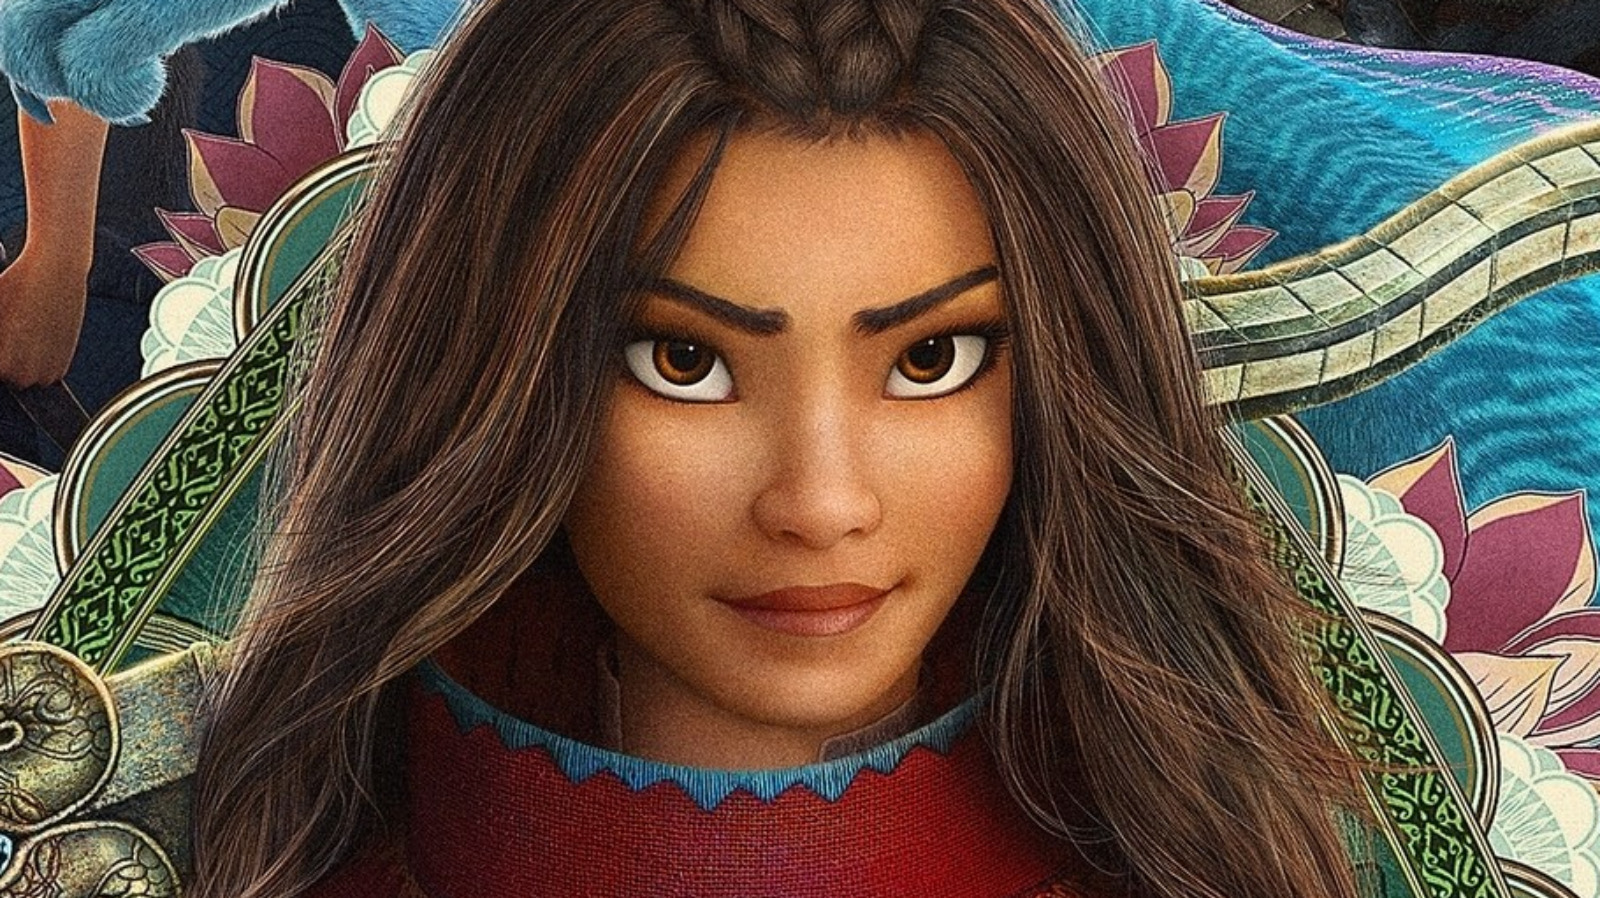 Why Raya From Raya And The Last Dragon Is A Disney Hero For